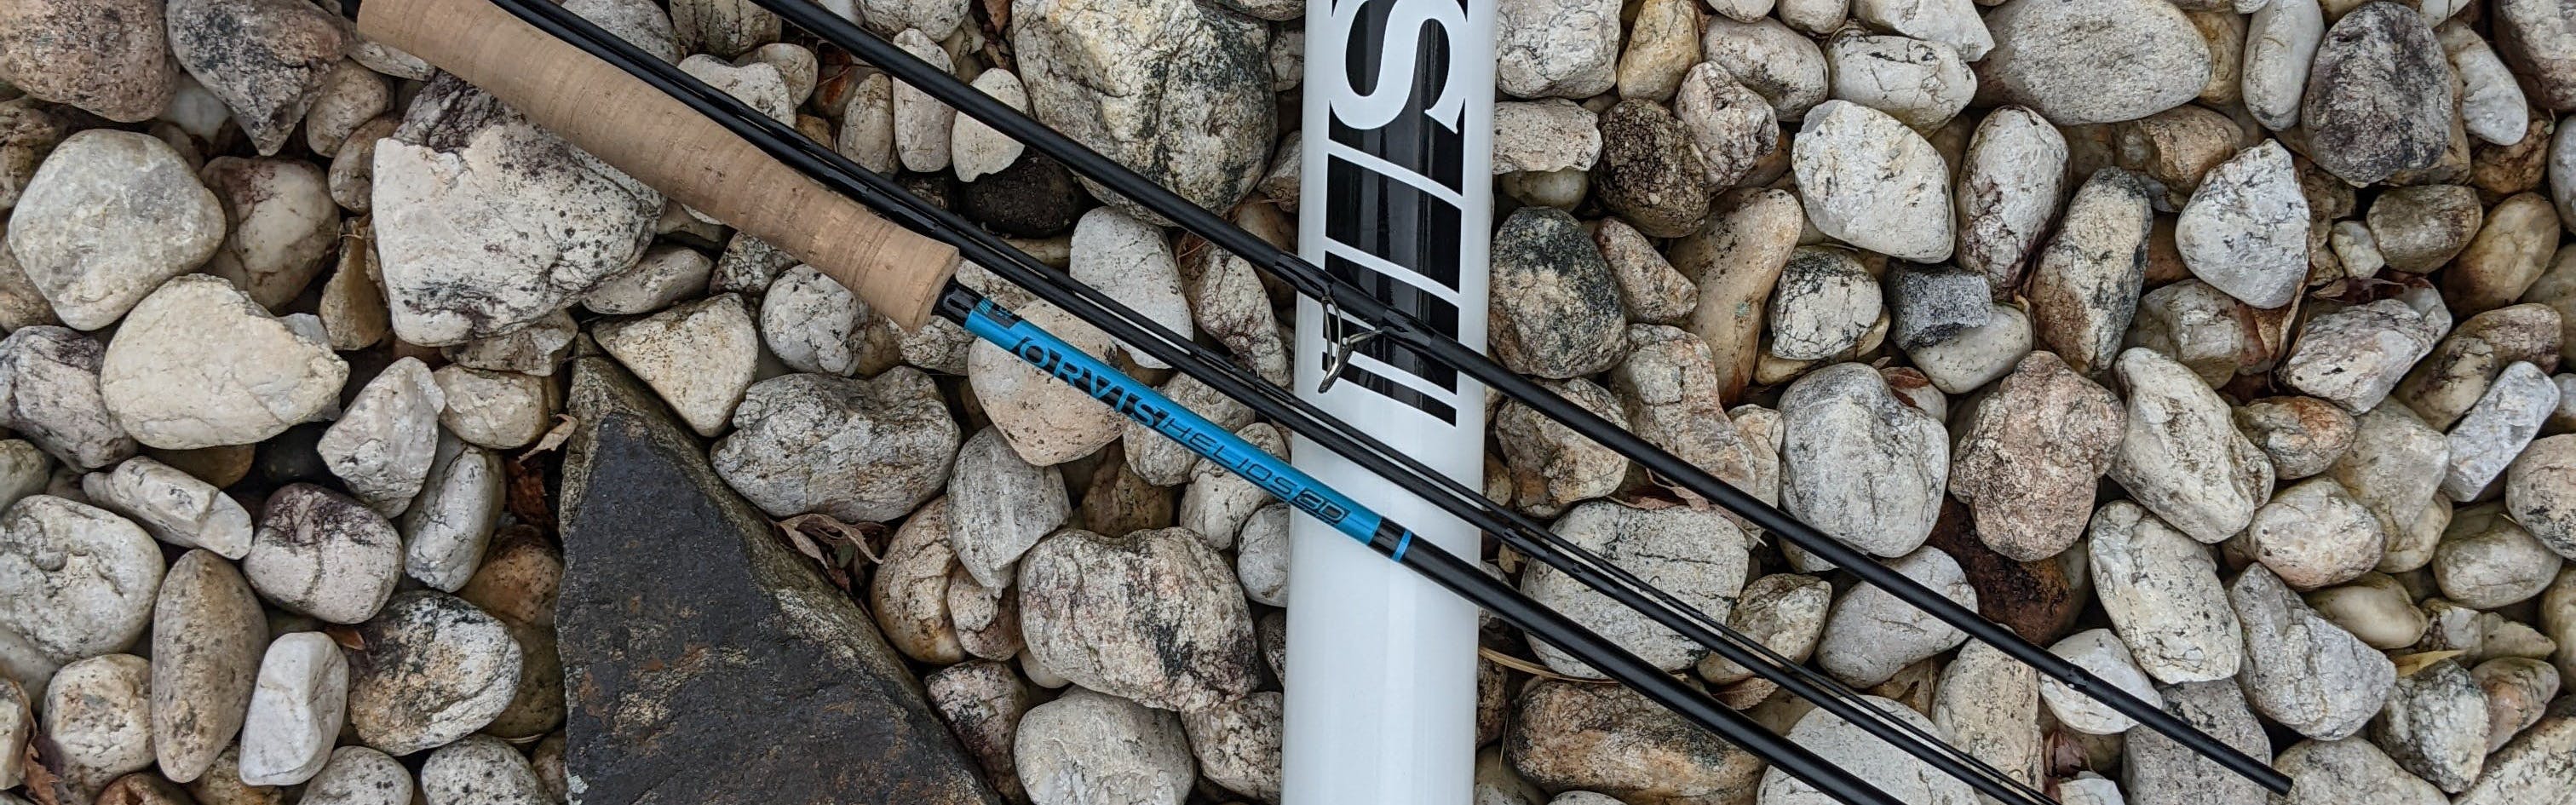 Foundation Fly Rod Combo Review (Beaver Dam Surprise!) 